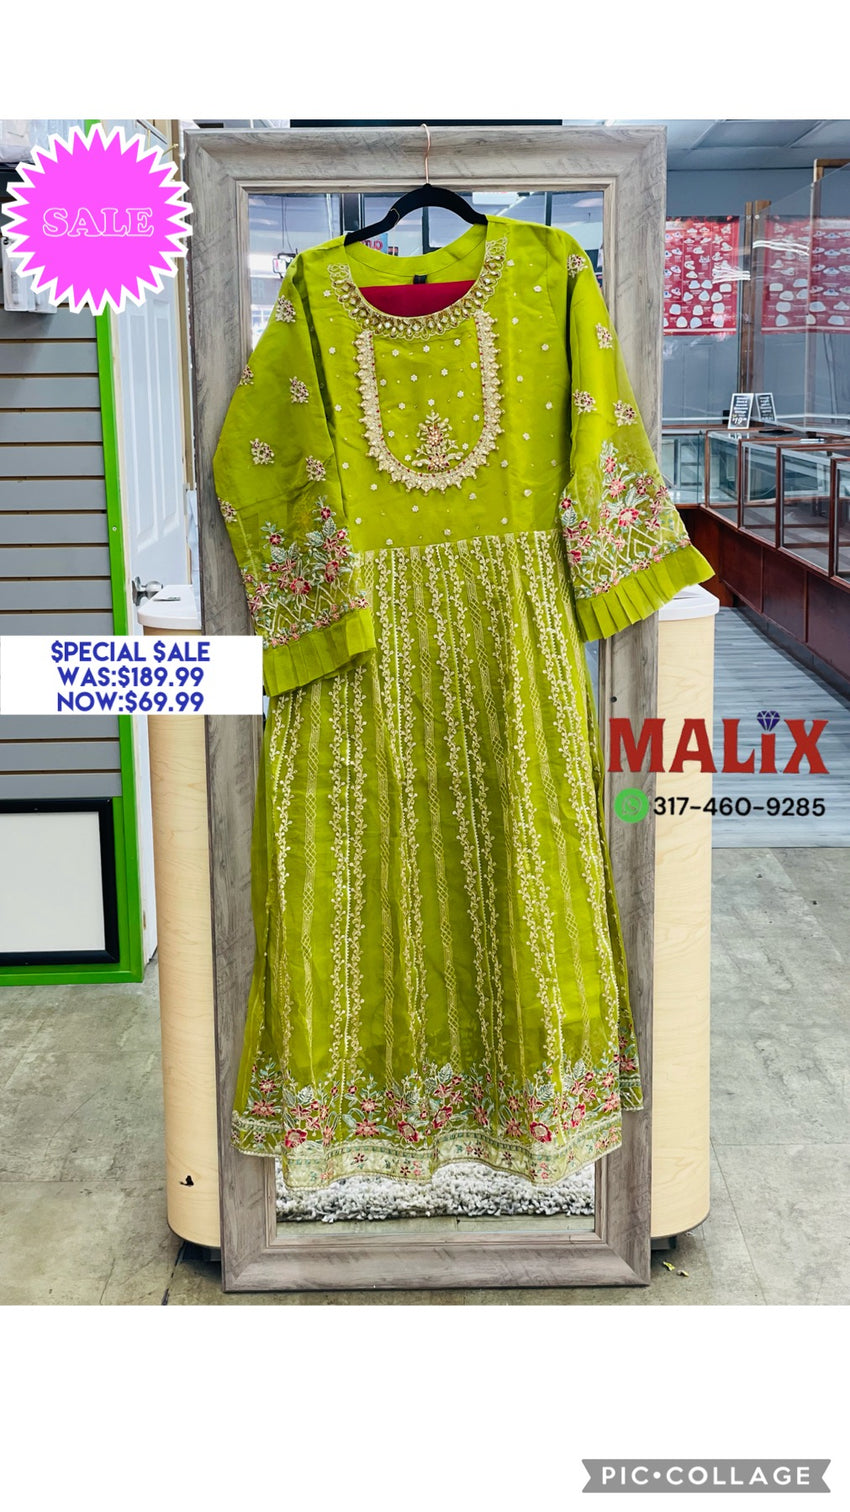 Enchanting Light Green Anarkali Gown with Heavy Beaded Neck, Gold Threaded Design, Duppata, and Matching Bottom Pants.